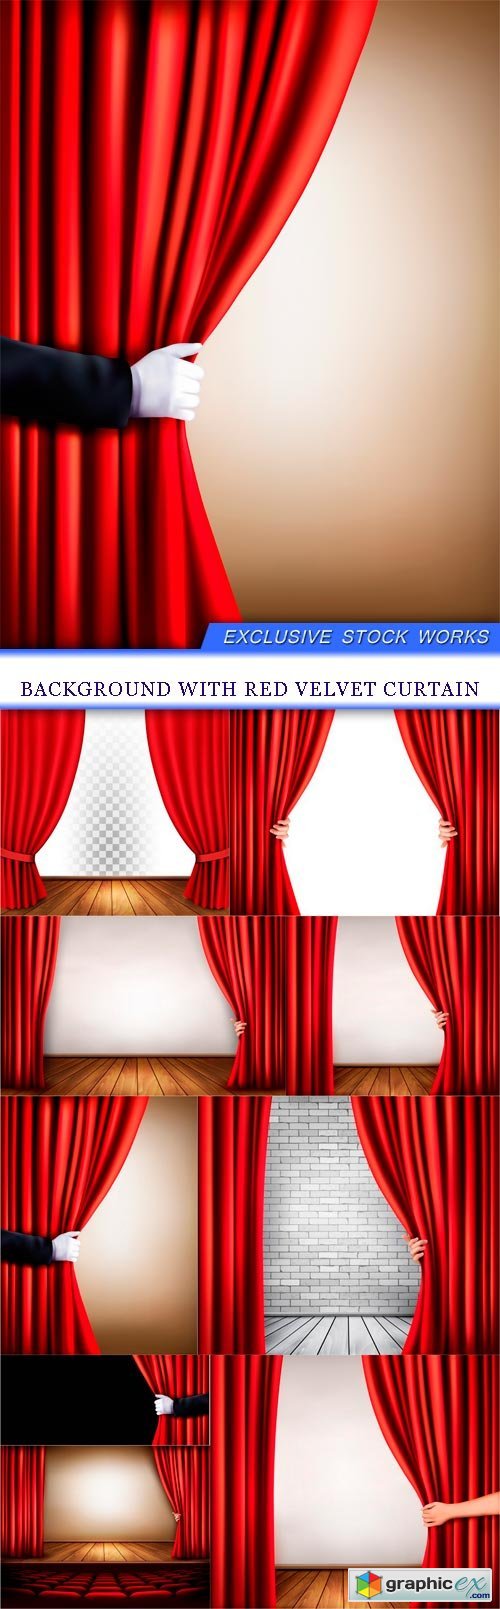 Background with red velvet curtain 9x EPS